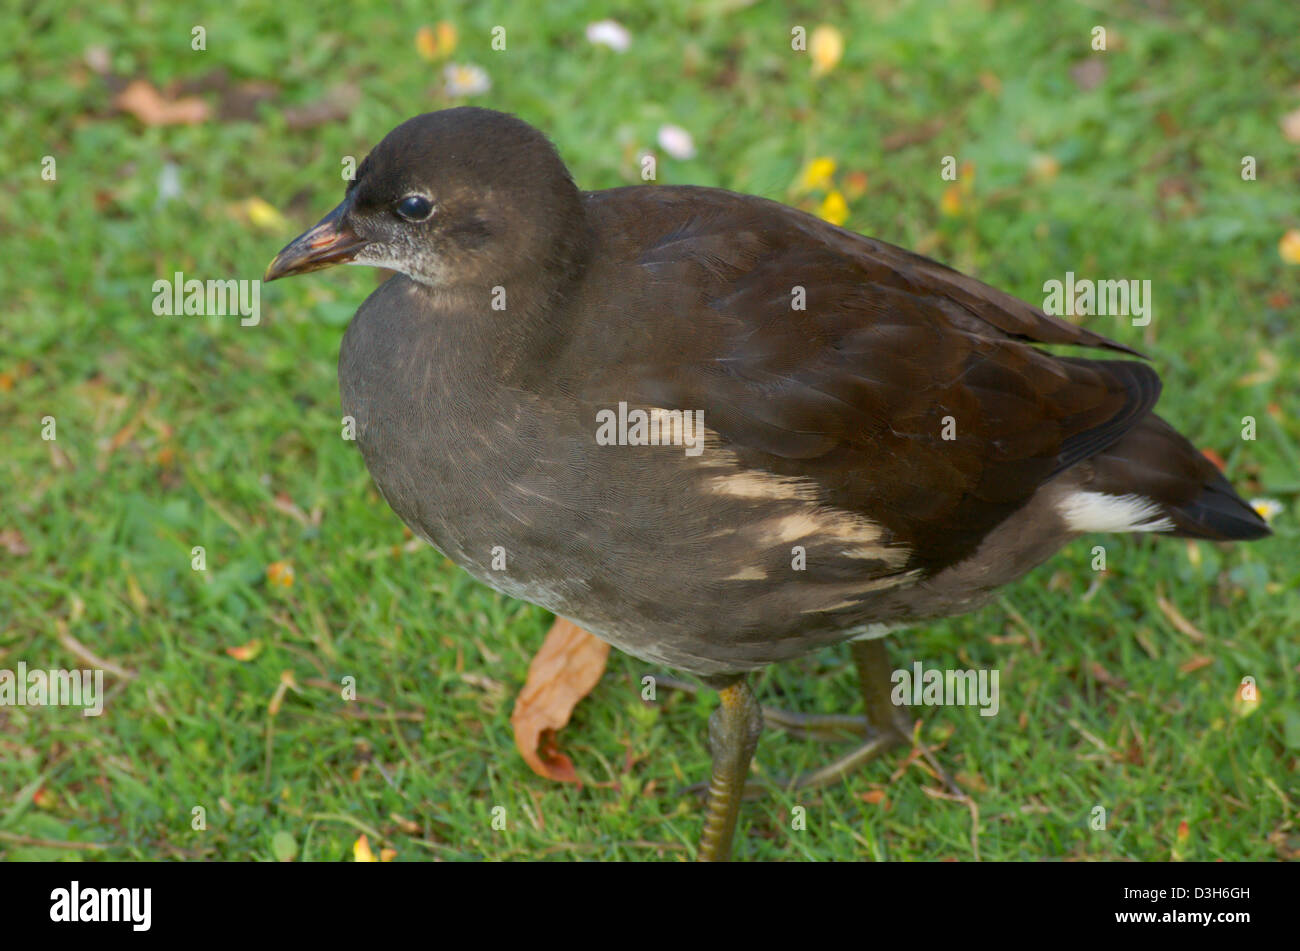 Juvenile Common Moorhen in a Park in London, England Stock Photo